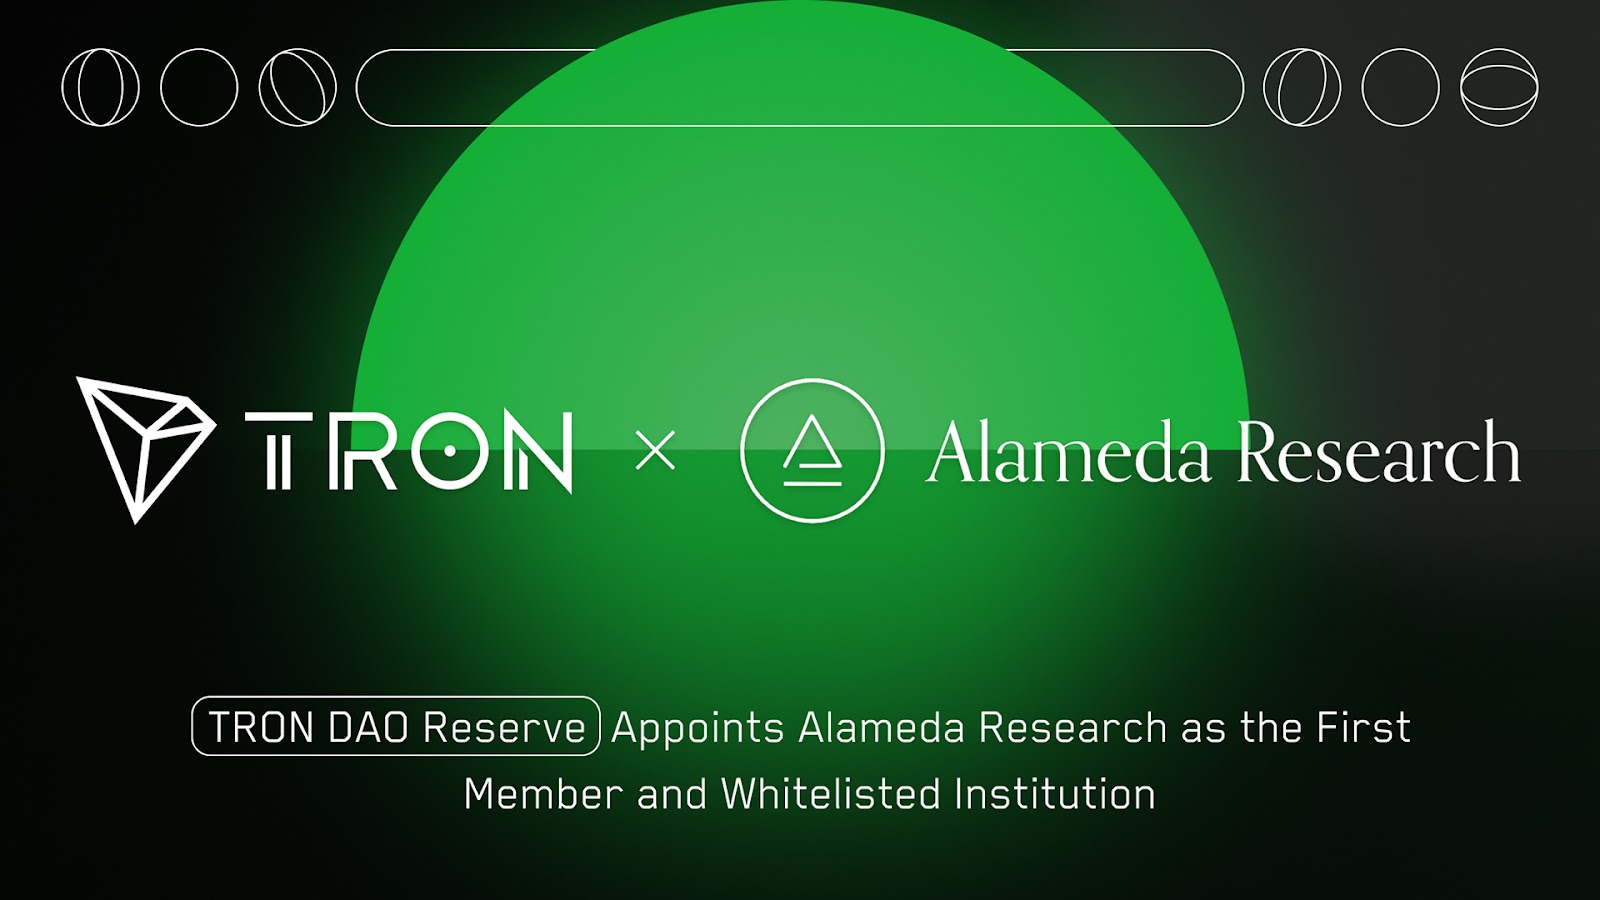 TRON DAO Reserve Appoints Alameda Research as the First Member and Whitelisted Institution - 1